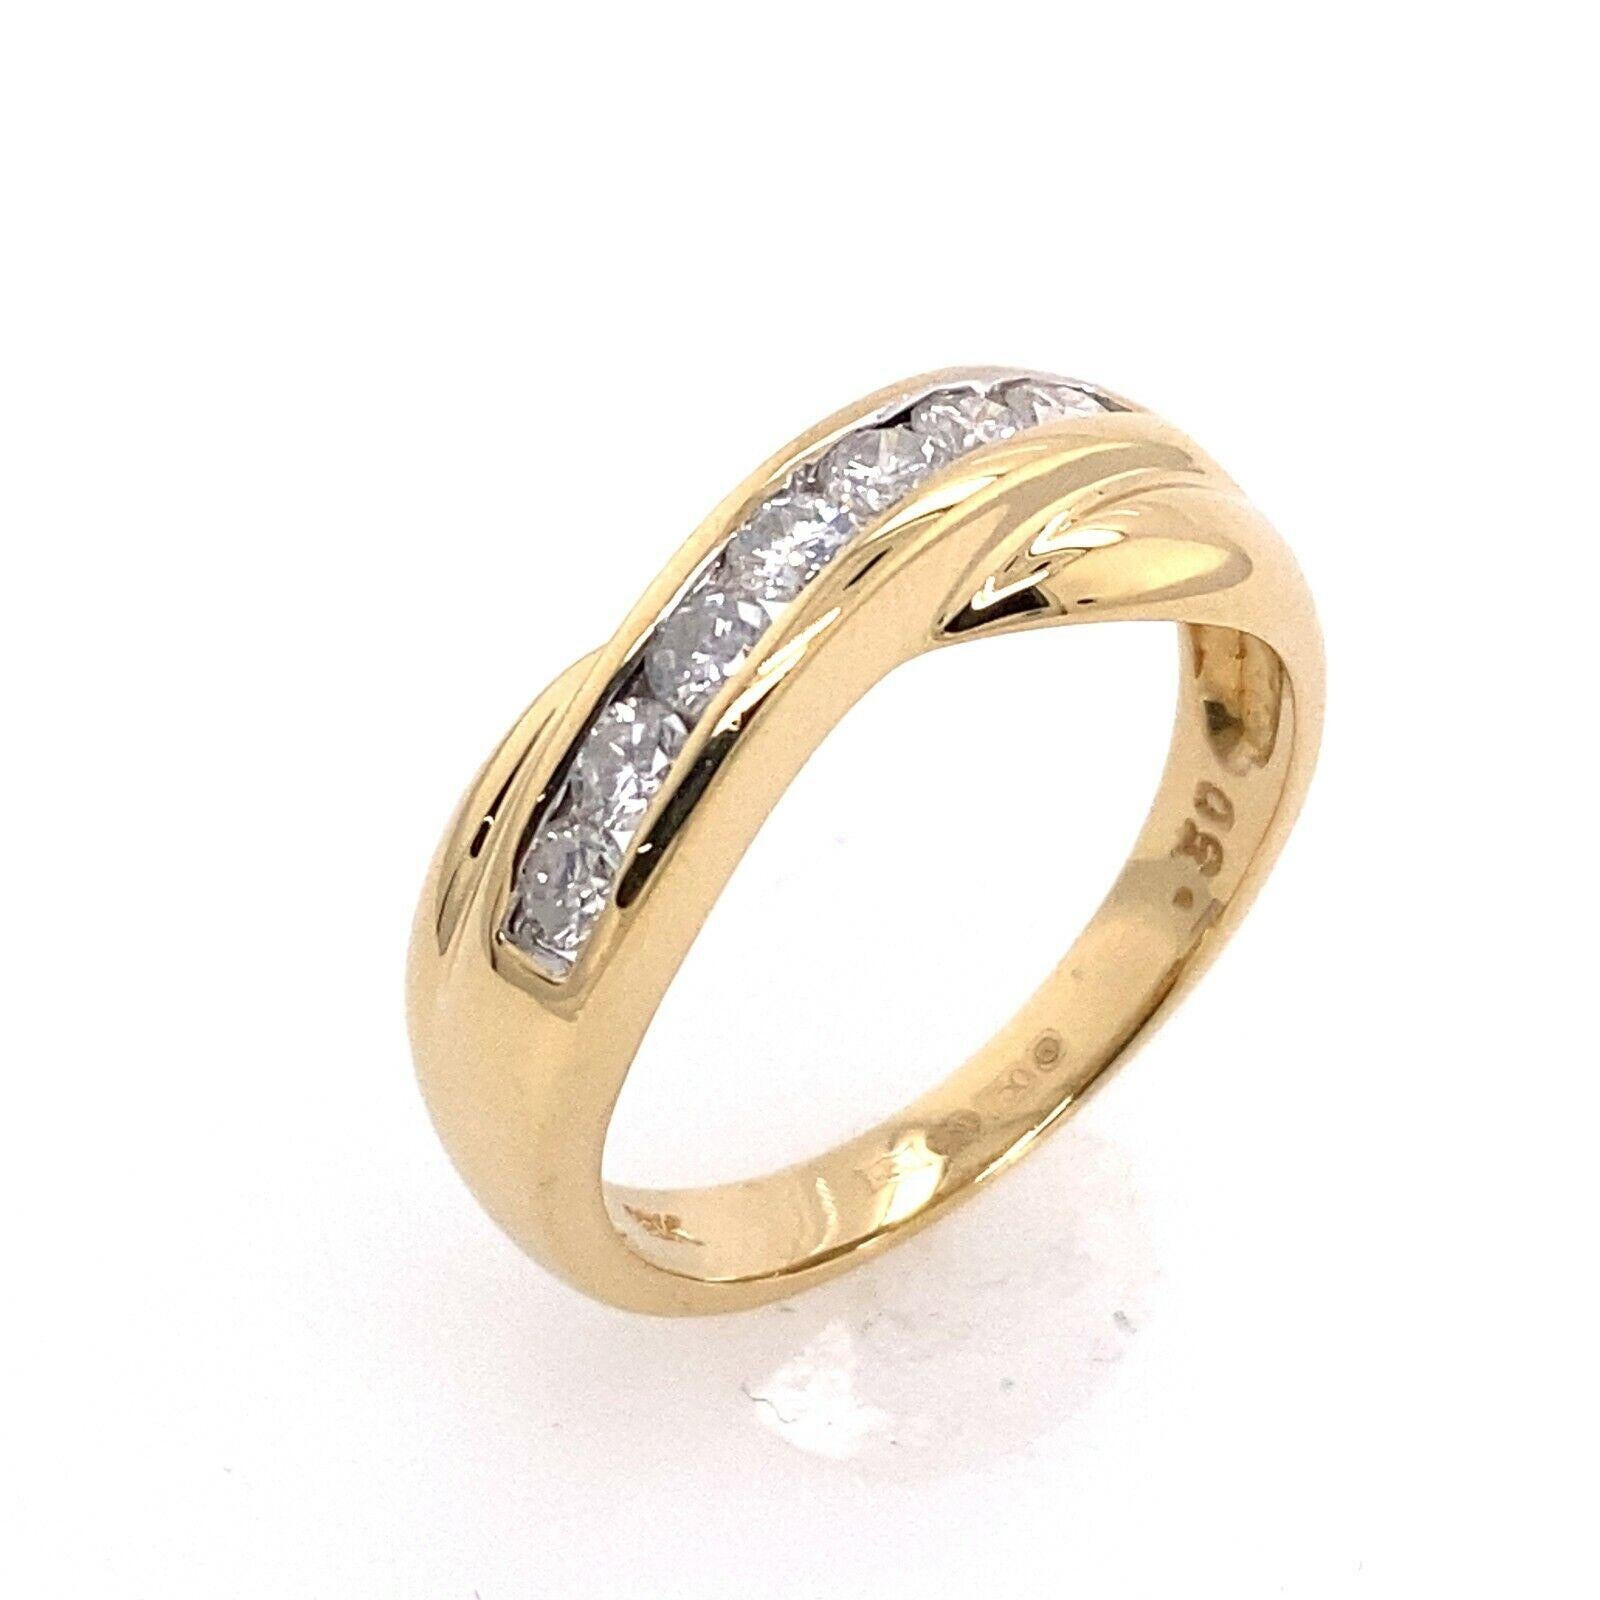 0.50ct Classic 18ct Yellow Gold Diamond Channel Set Crossover Wedding Ring

A classic and traditional design, this 0.50ct Diamond crossover wedding ring set features 7 round brilliant cut Diamonds. The diamonds are channel set into the ring and the